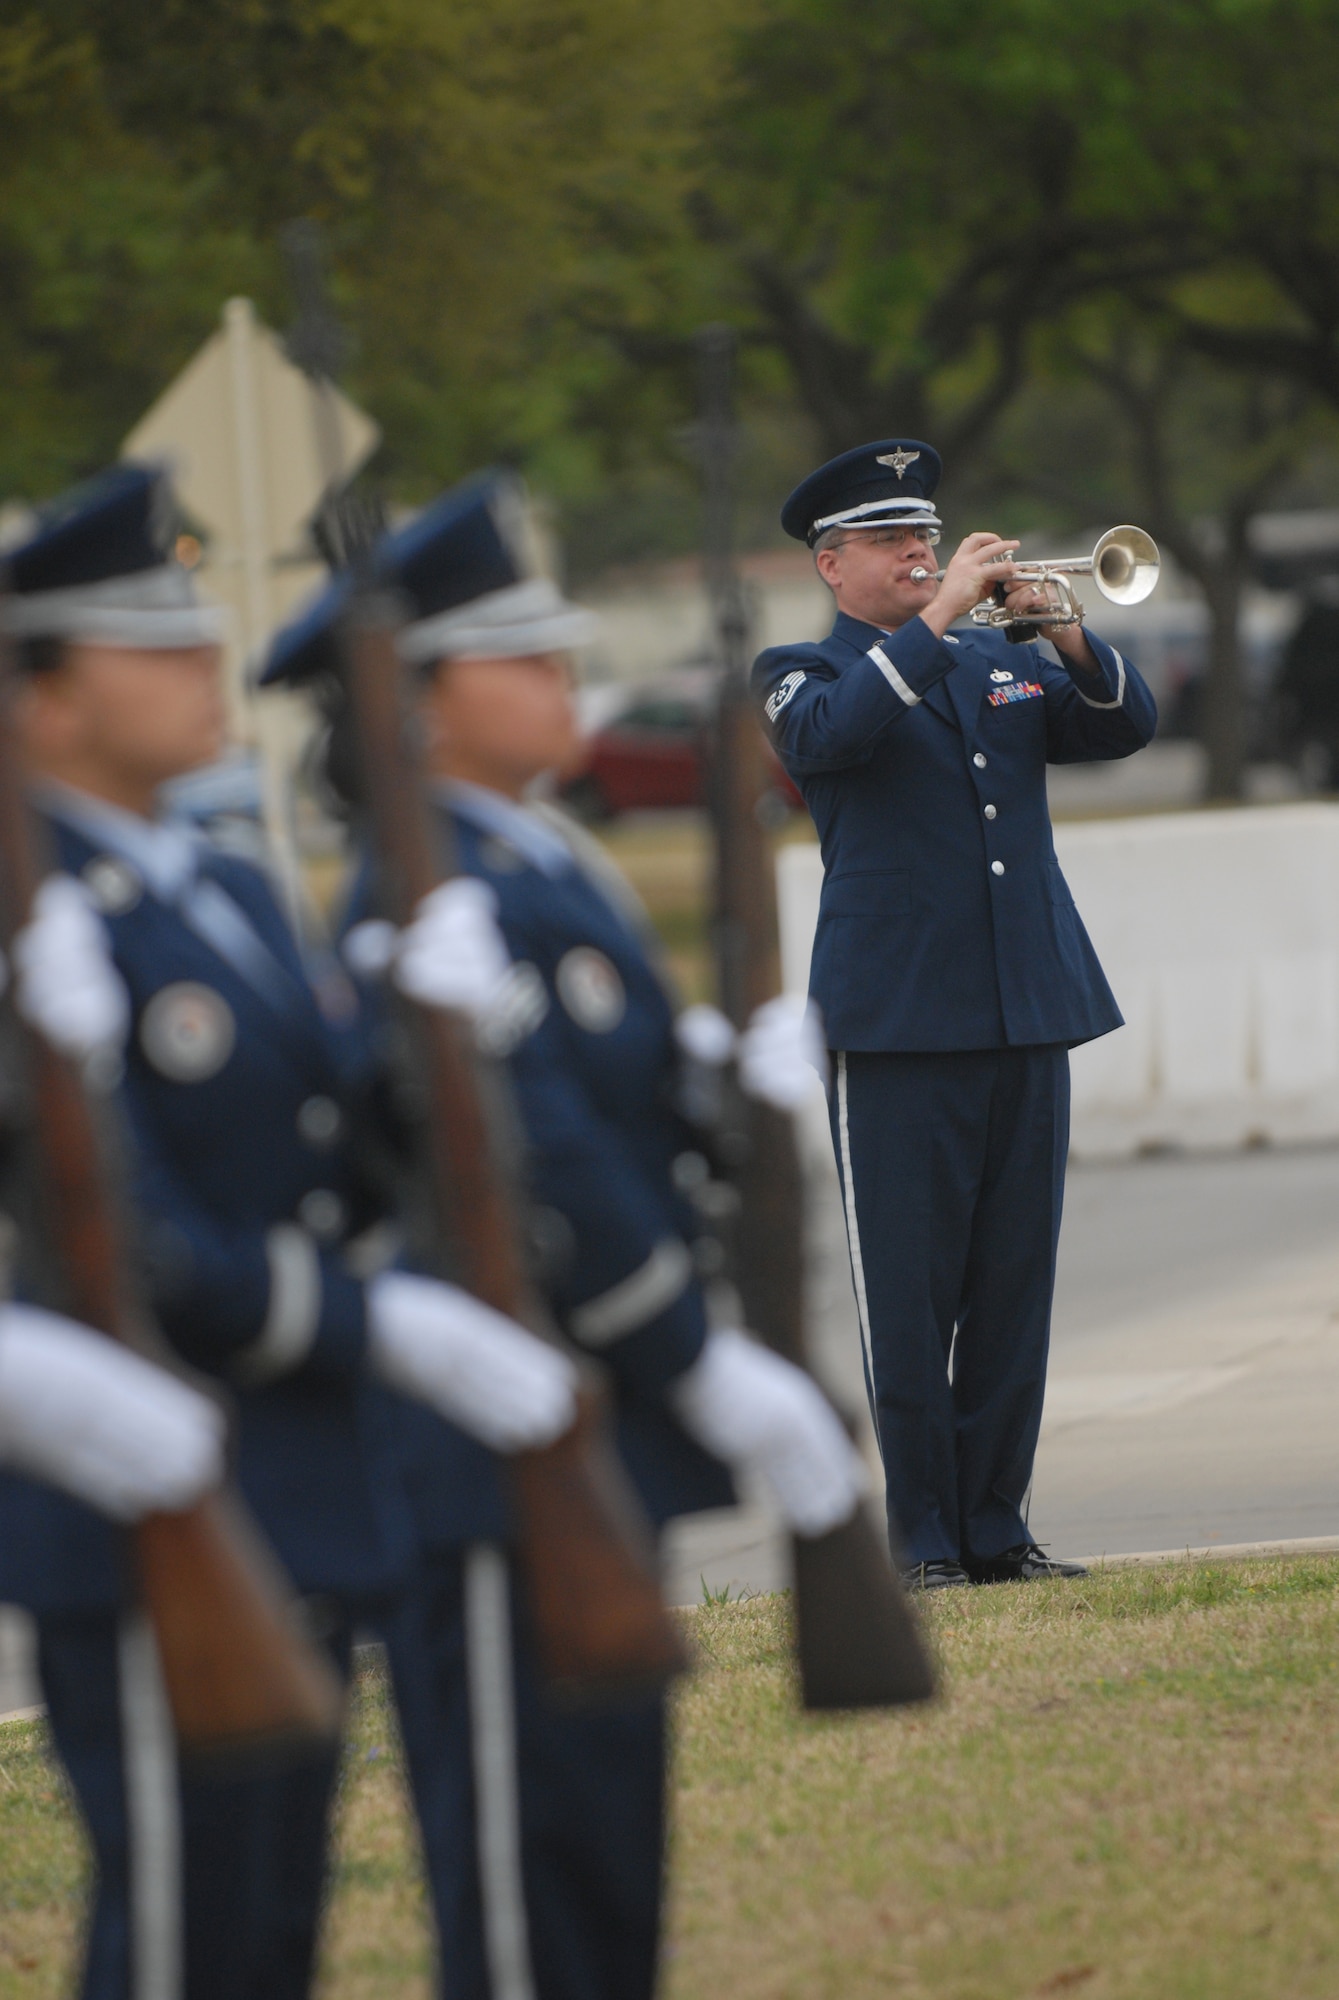 A bugler plays taps during the wreath-laying ceremony at the Missing Man Monument, one of the events for the 35th annual reunion of the Freedom Flyers, the Air Force aviators who were imprisoned during the Vietnam War and were later requalified as pilots by Randolph?s 560th Flying Training Squadron. (U.S. Air Force photo by Steve White)